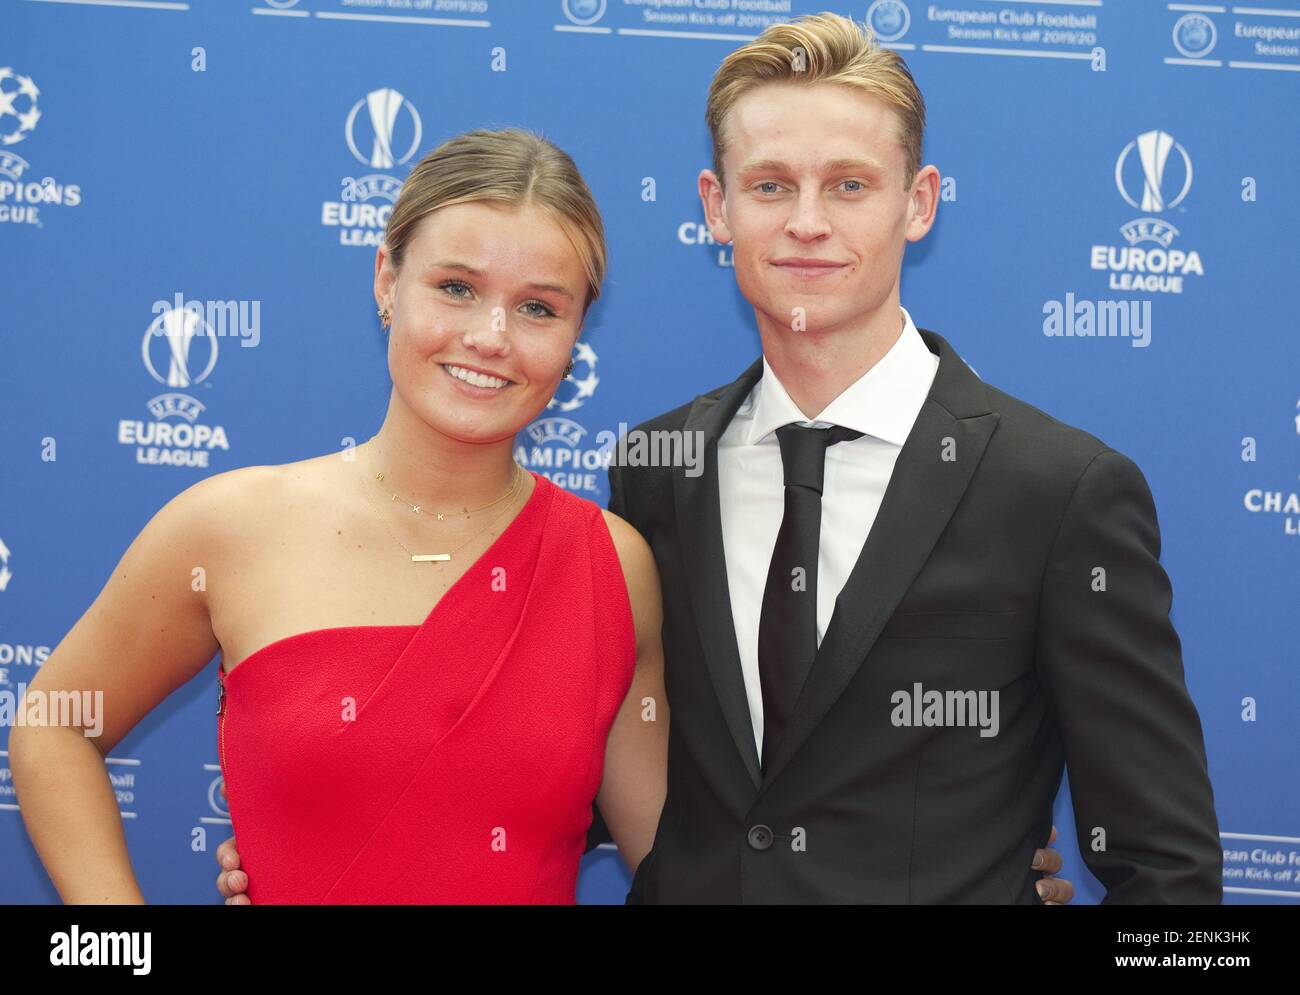 Monaco, Monte Carlo - August 29, 2019: UEFA Champions League Group Stage Draw and Player of the Year Awards, Season Kick Off 2019-2020 with Dutch midfielder Frenkie de Jong and Girlfriend Stock Photo